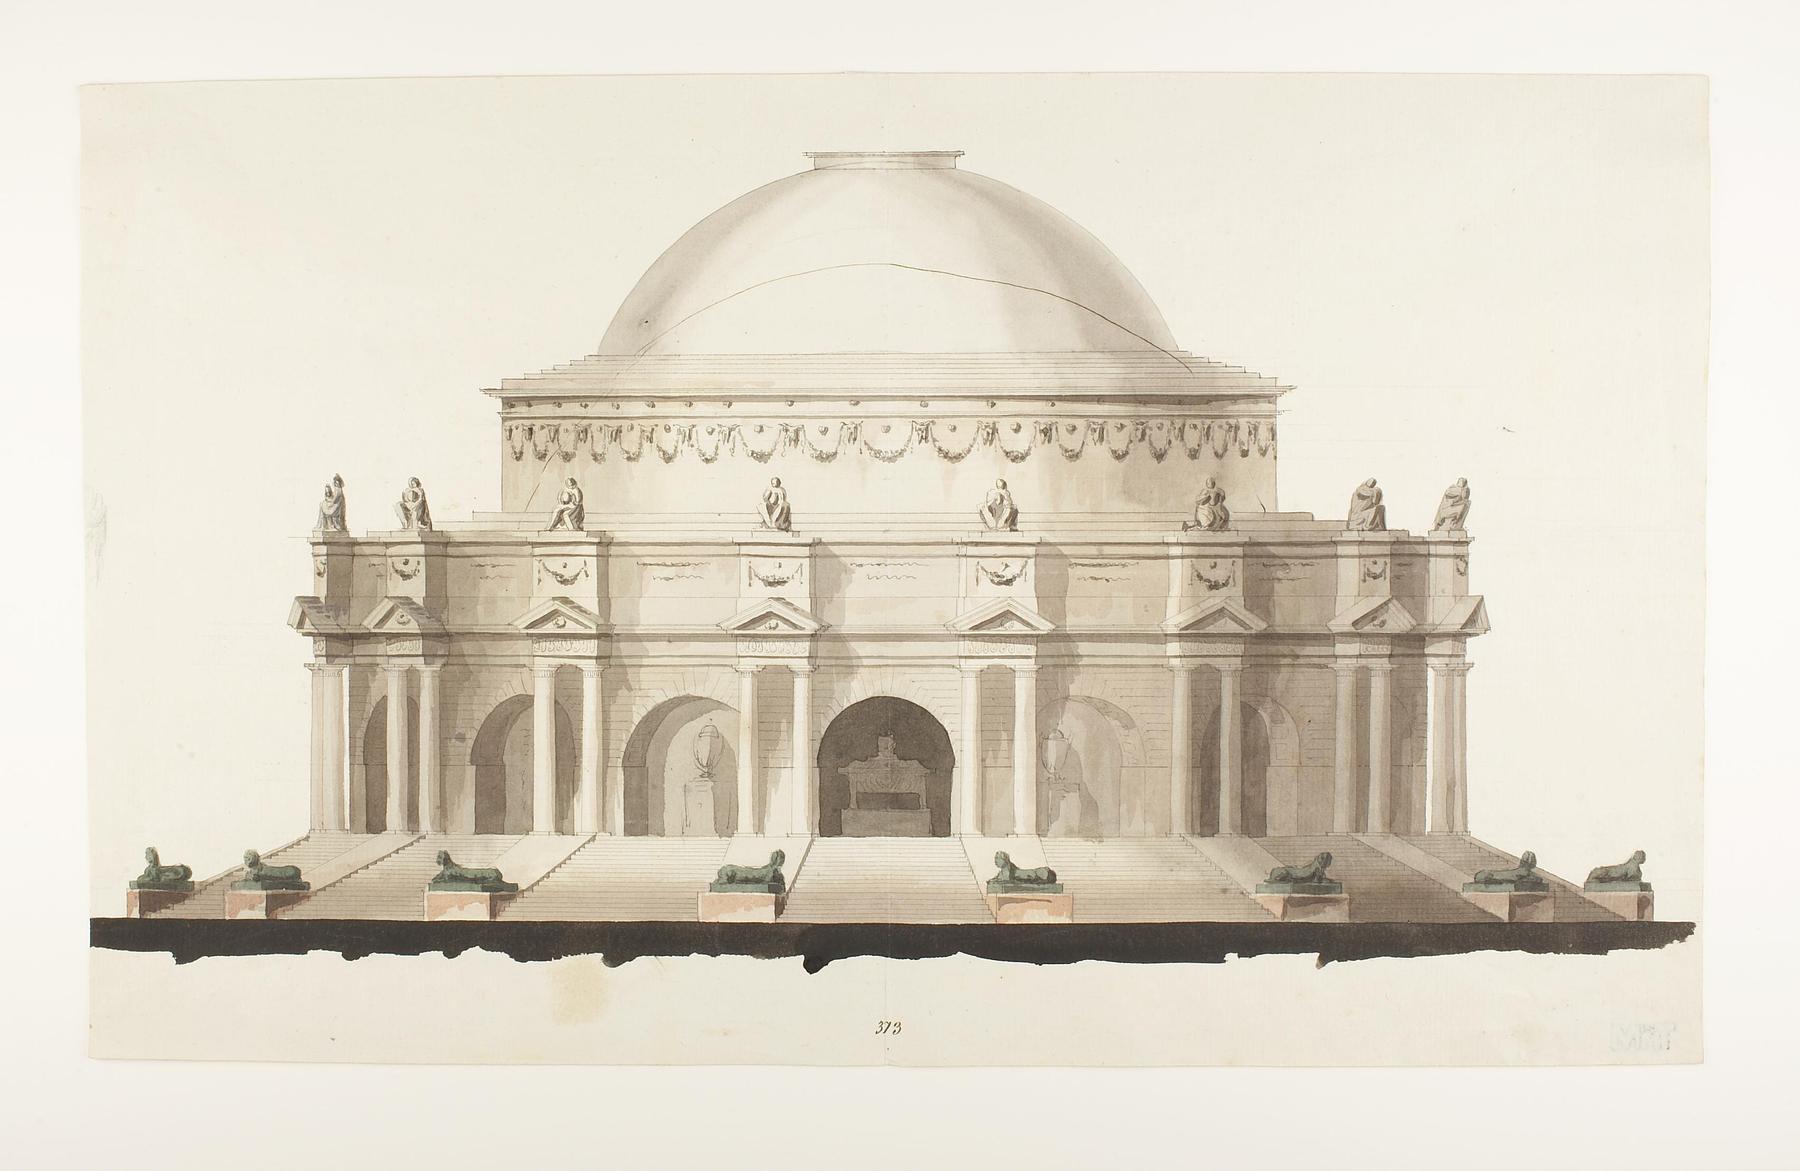 Sketch for a Mausoleum or Sepulchral Chapel in Antique Style, Elevation of Facade, D861